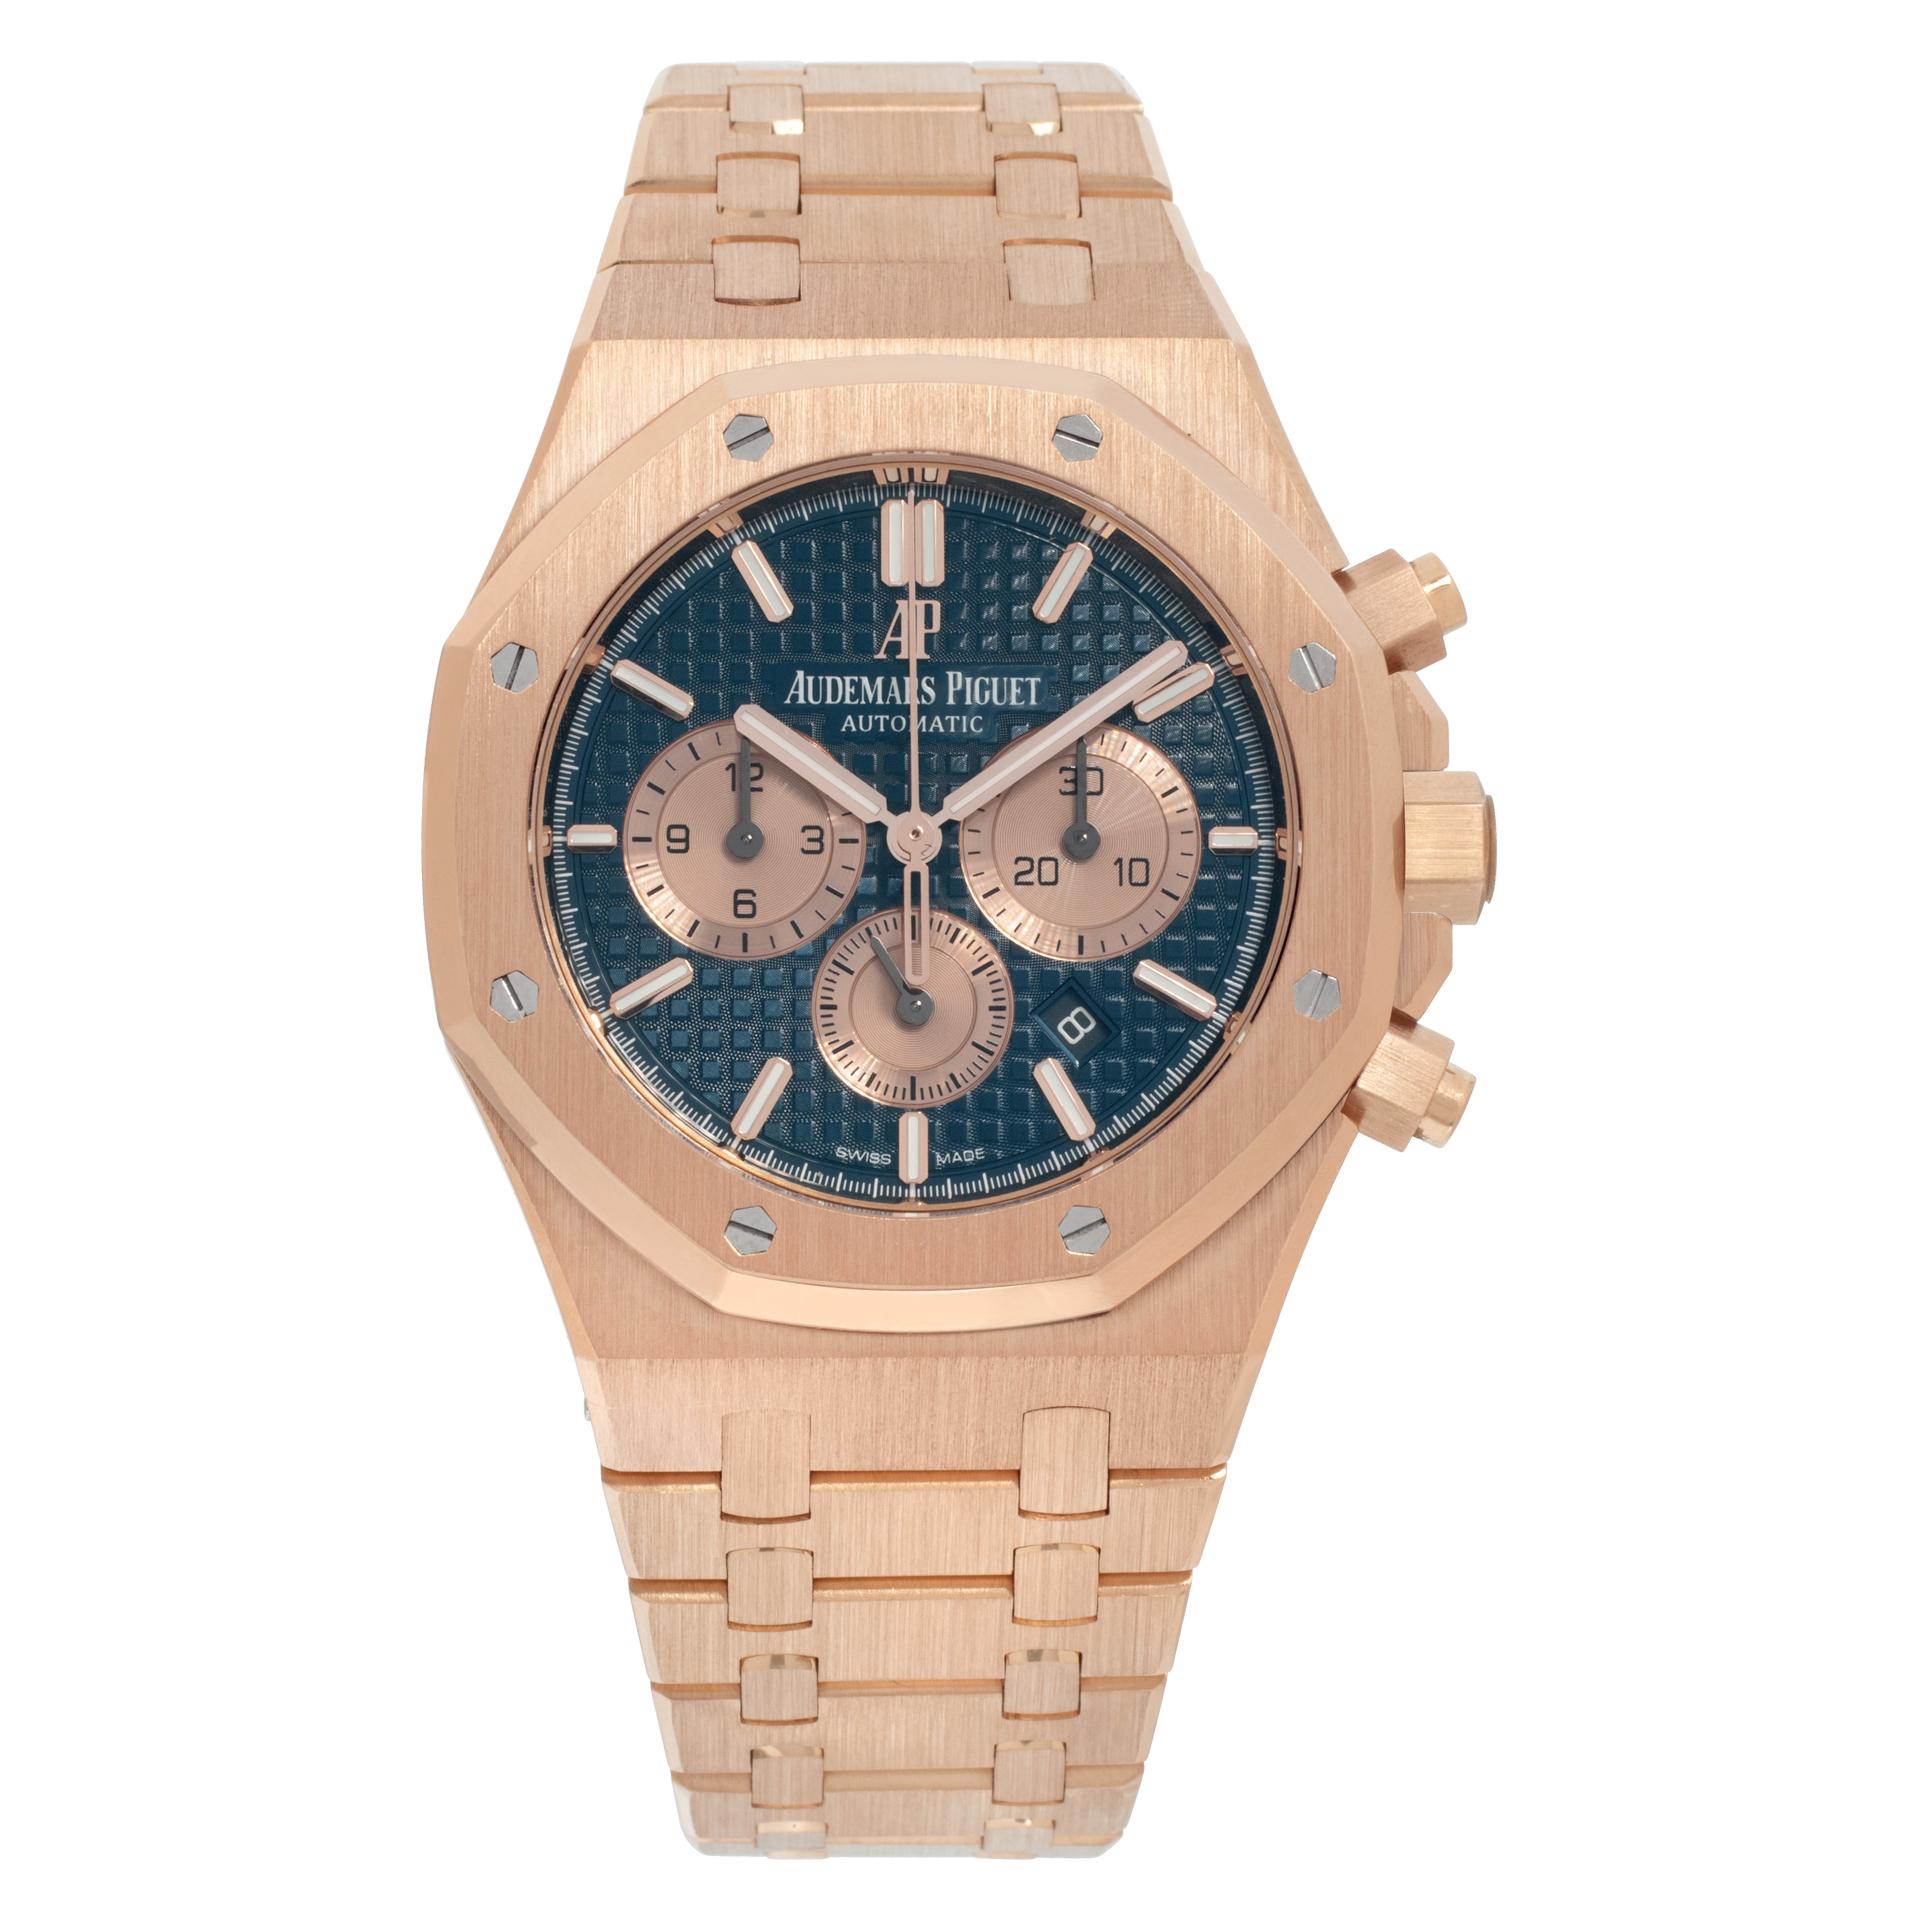 Audemars Piguet Royal Oak Chronograph in 18k rose gold with blue dial with gold colored sub-dials on brown alligator strap with AP 18k rose gold deployant buckle. AP Archive states watch was originally made with leather strap and additonally comes